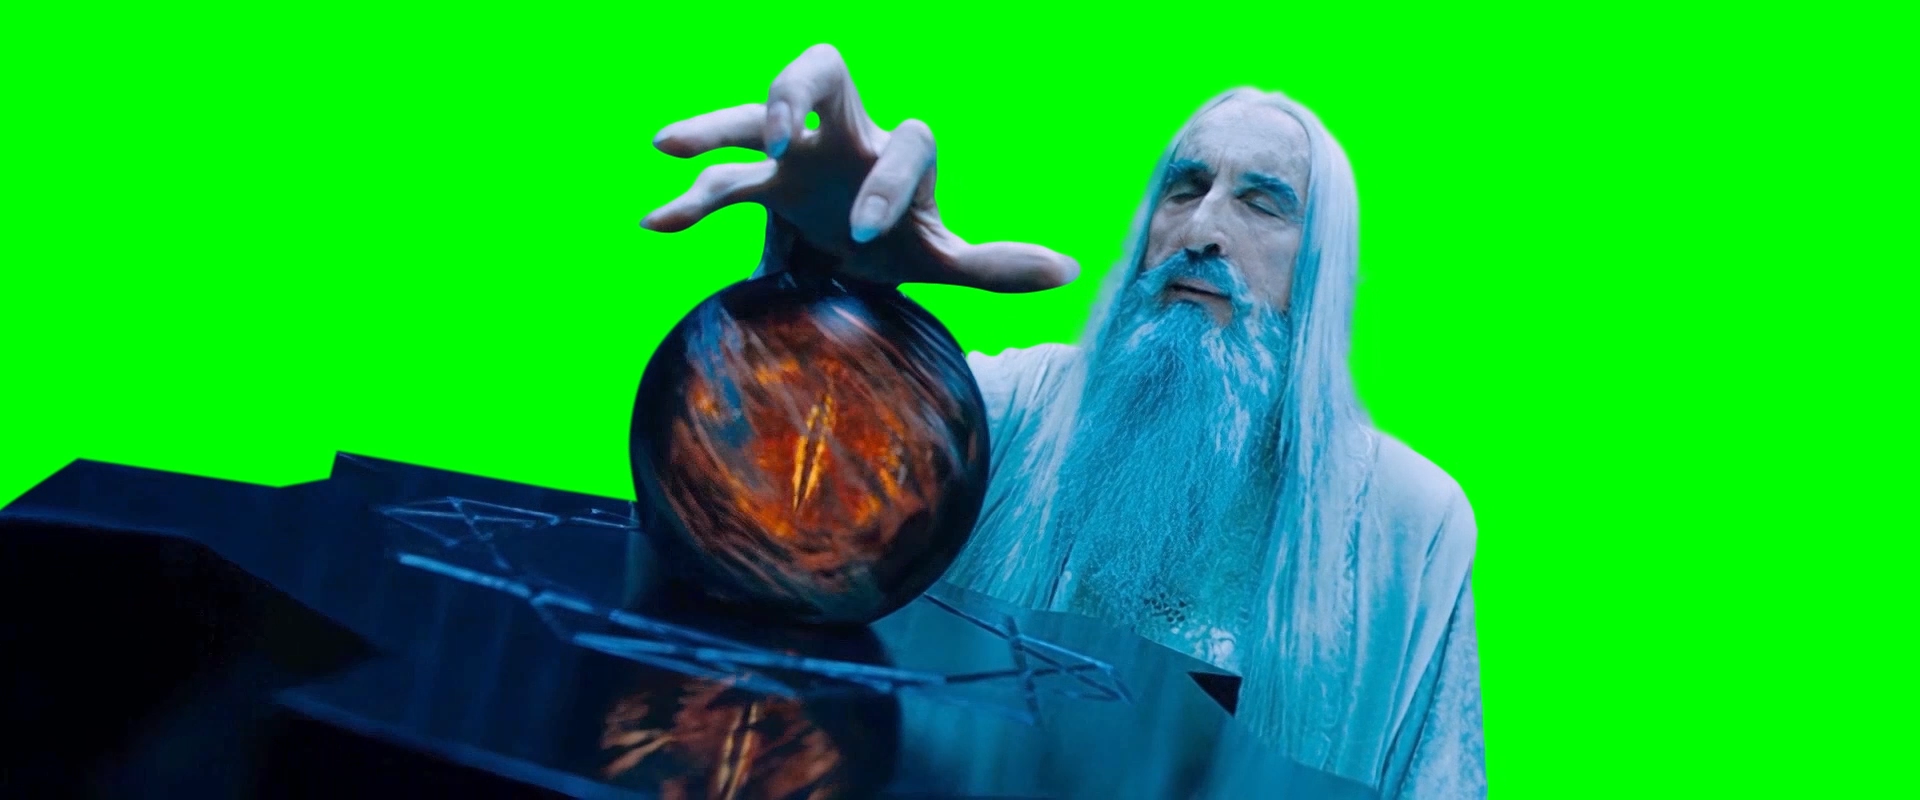 Sauron Ball meme - The Lord of the Rings V2 (Green Screen)